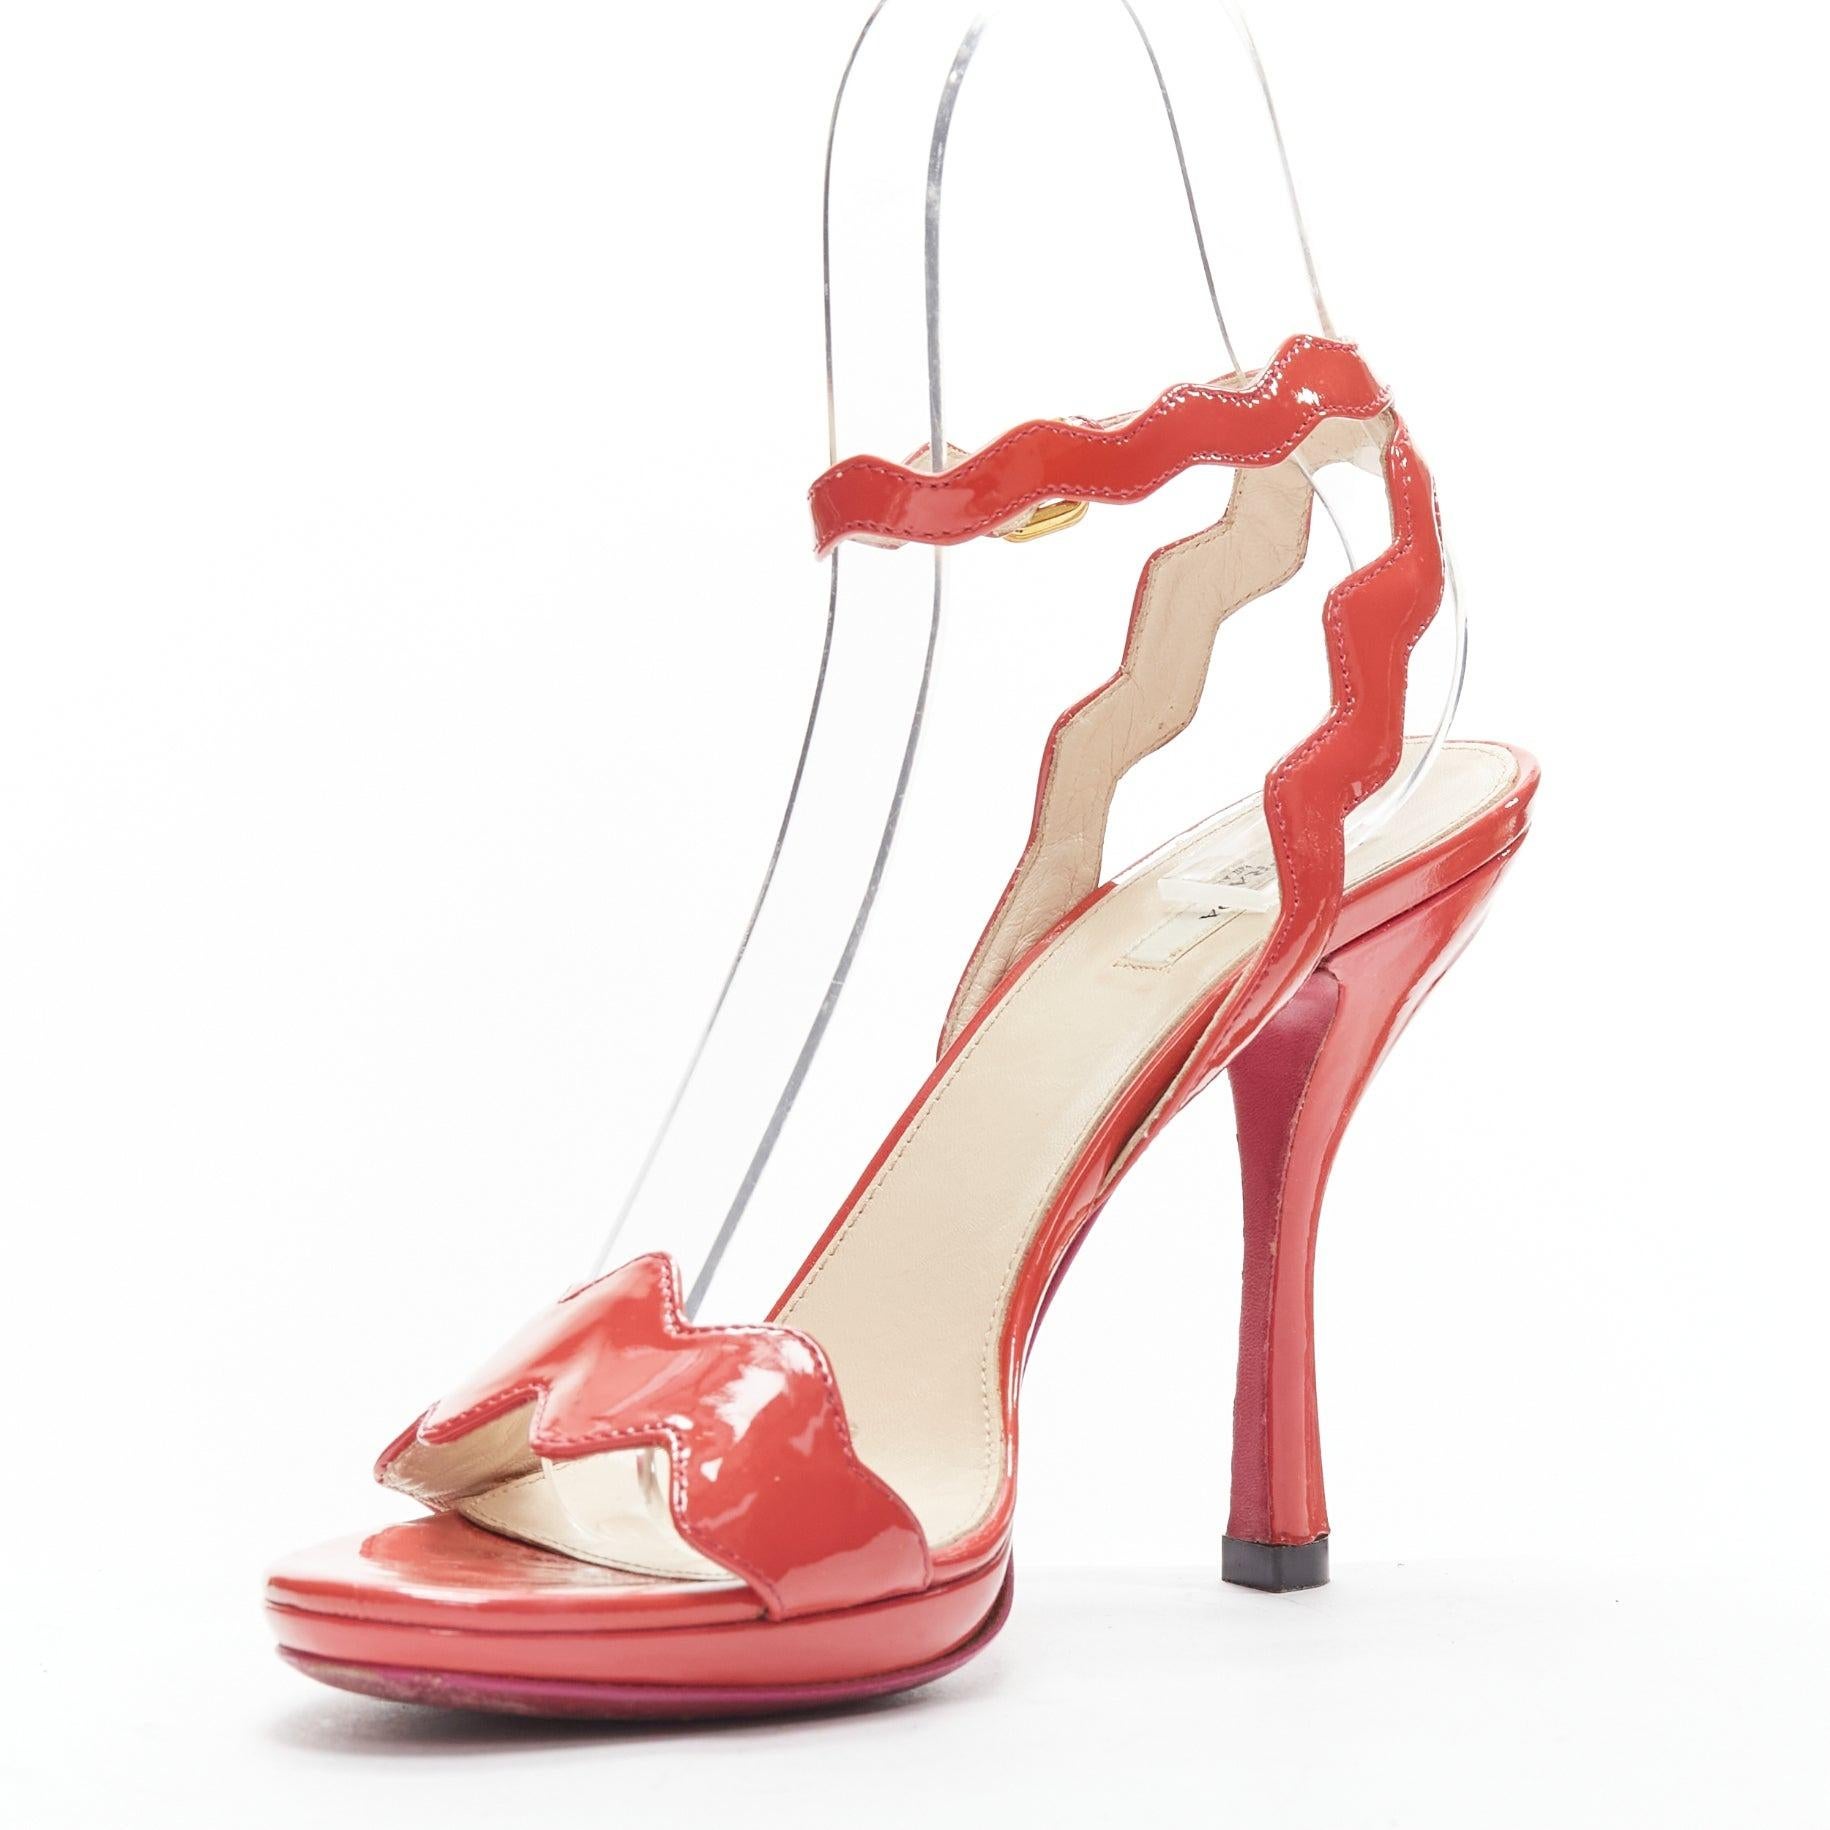 PRADA rose pink patent leather squiggly strap sandal heels EU38.5 In Fair Condition For Sale In Hong Kong, NT